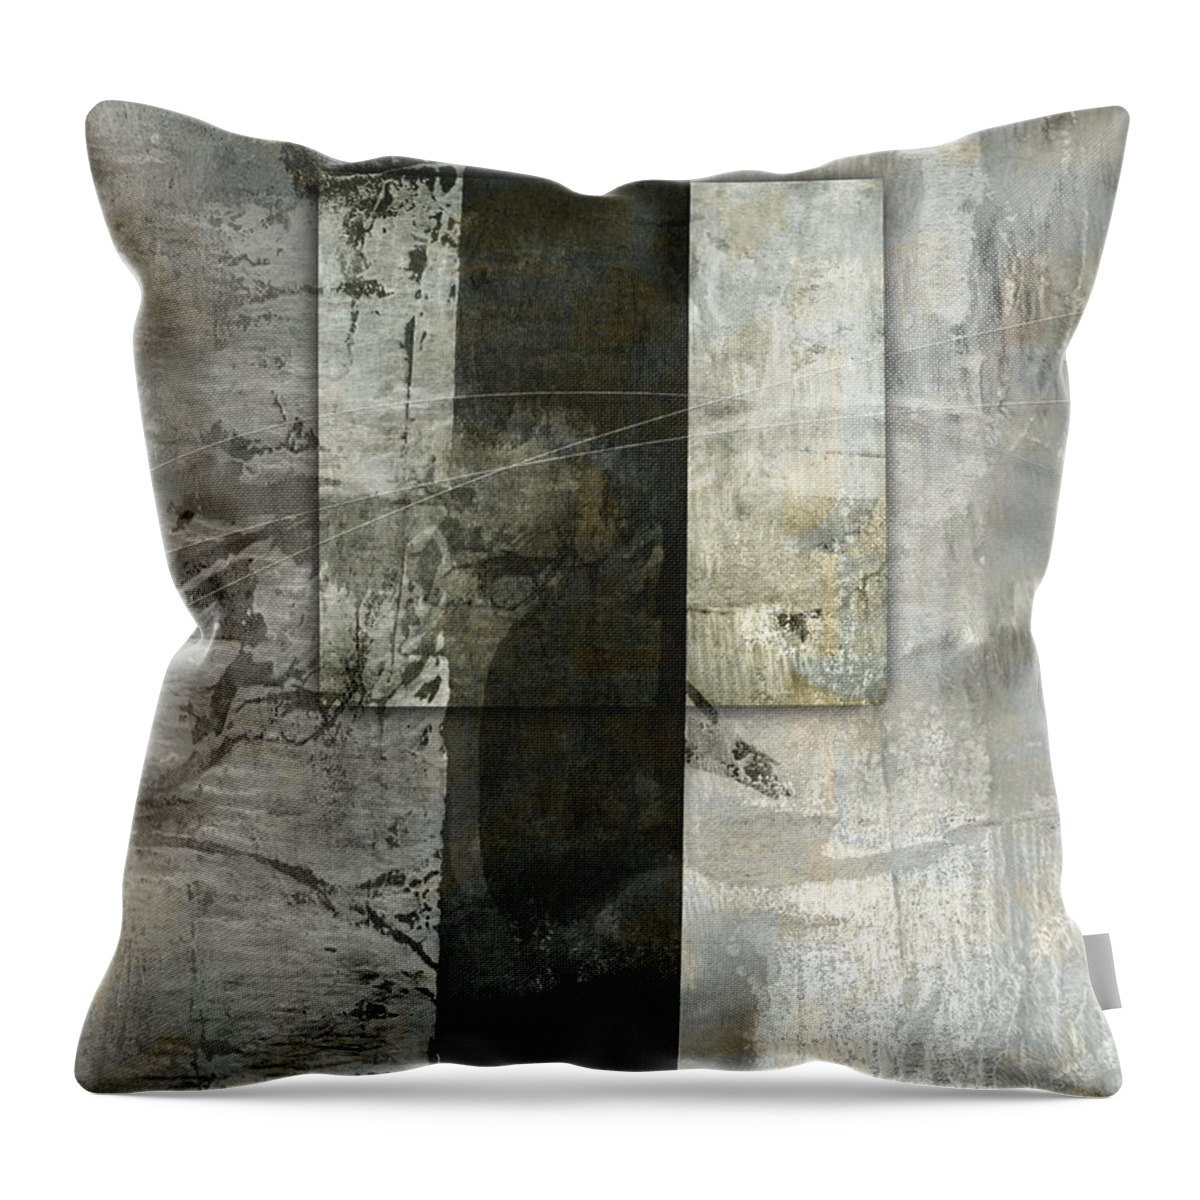 Abstract Throw Pillow featuring the photograph Holding It In by Carol Leigh